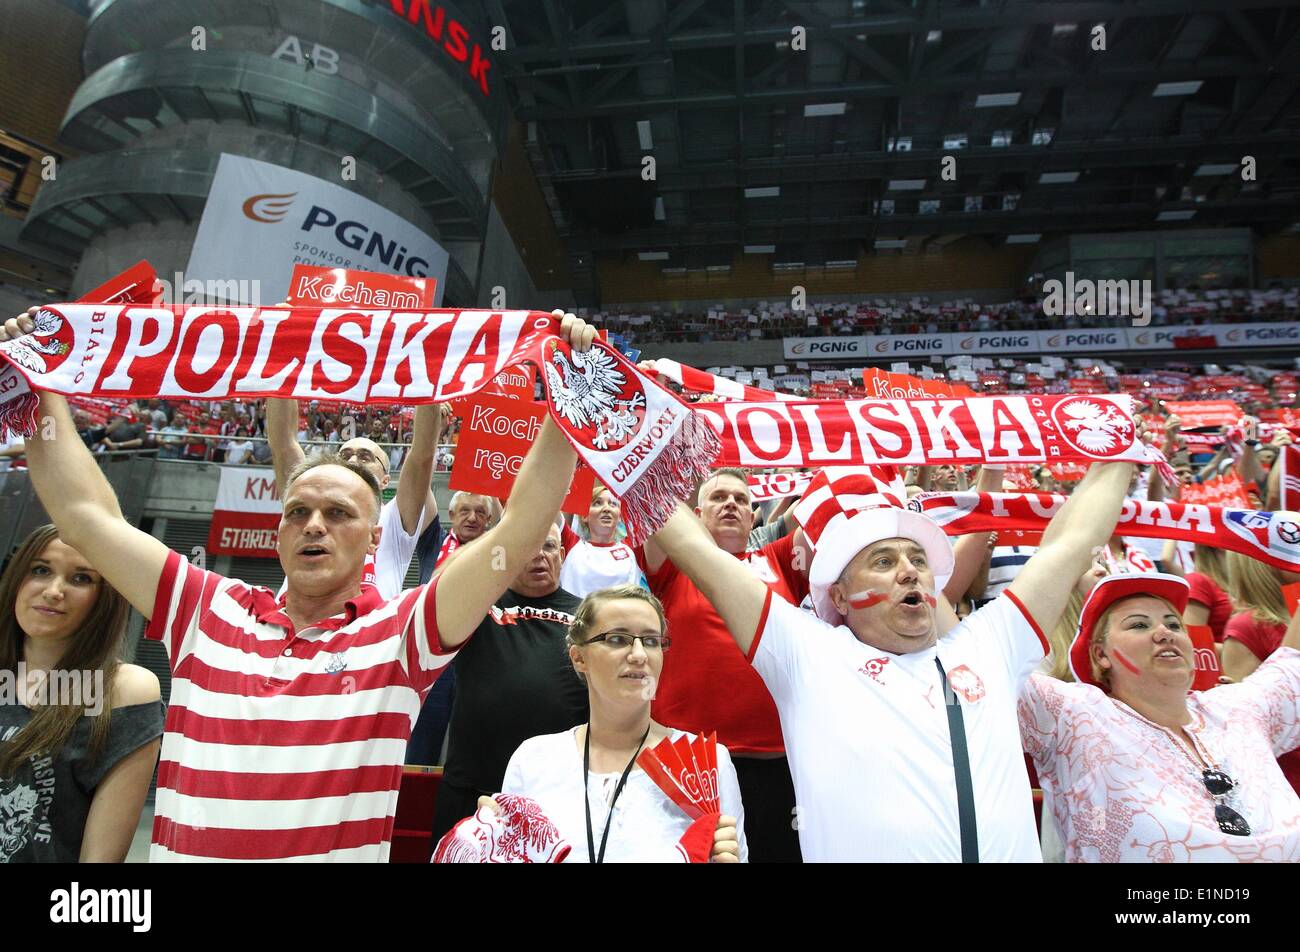 Gdansk, Poland 7th, June 2014 Quatar 2015 Men's World Handball Championship Play Off game between Poland and Germany at ERGO Arena sports hall. Polish fans react during the game. Credit:  Michal Fludra/Alamy Live News Stock Photo